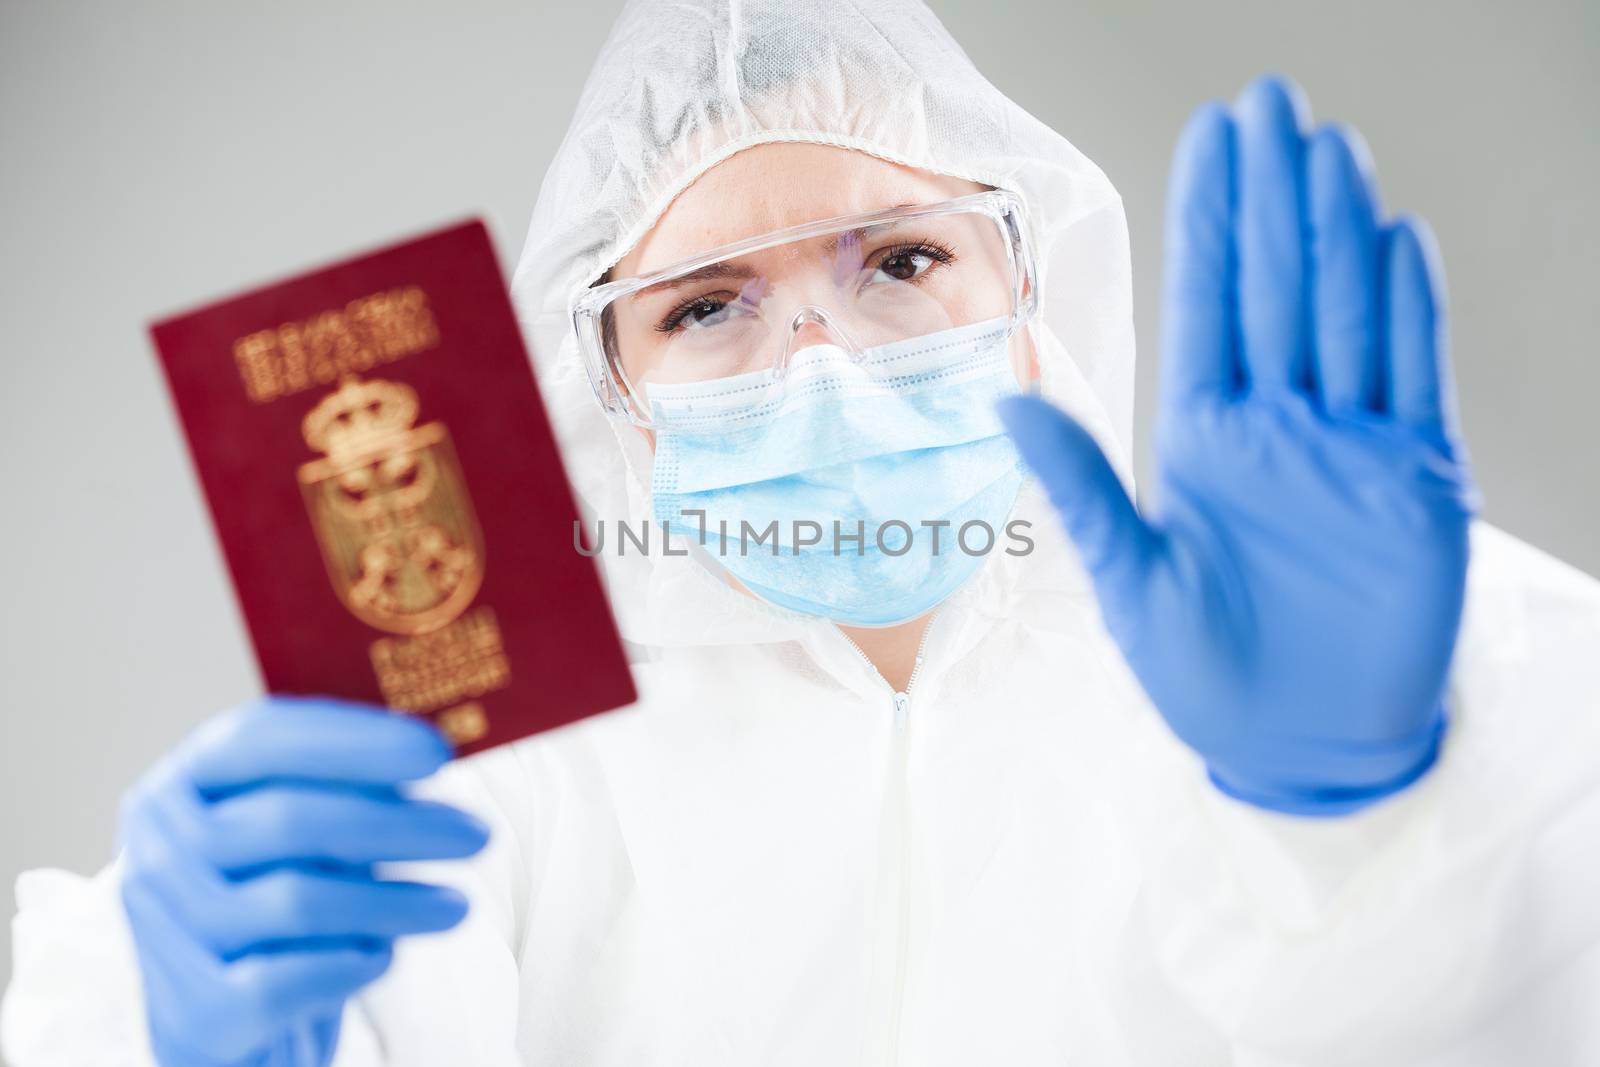 Security officer at airport customs security check holding passport, no entry quarantine and isolation order ban, COVID-19 virus disease epidemic, viral Coronavirus global worldwide pandemic outbreak